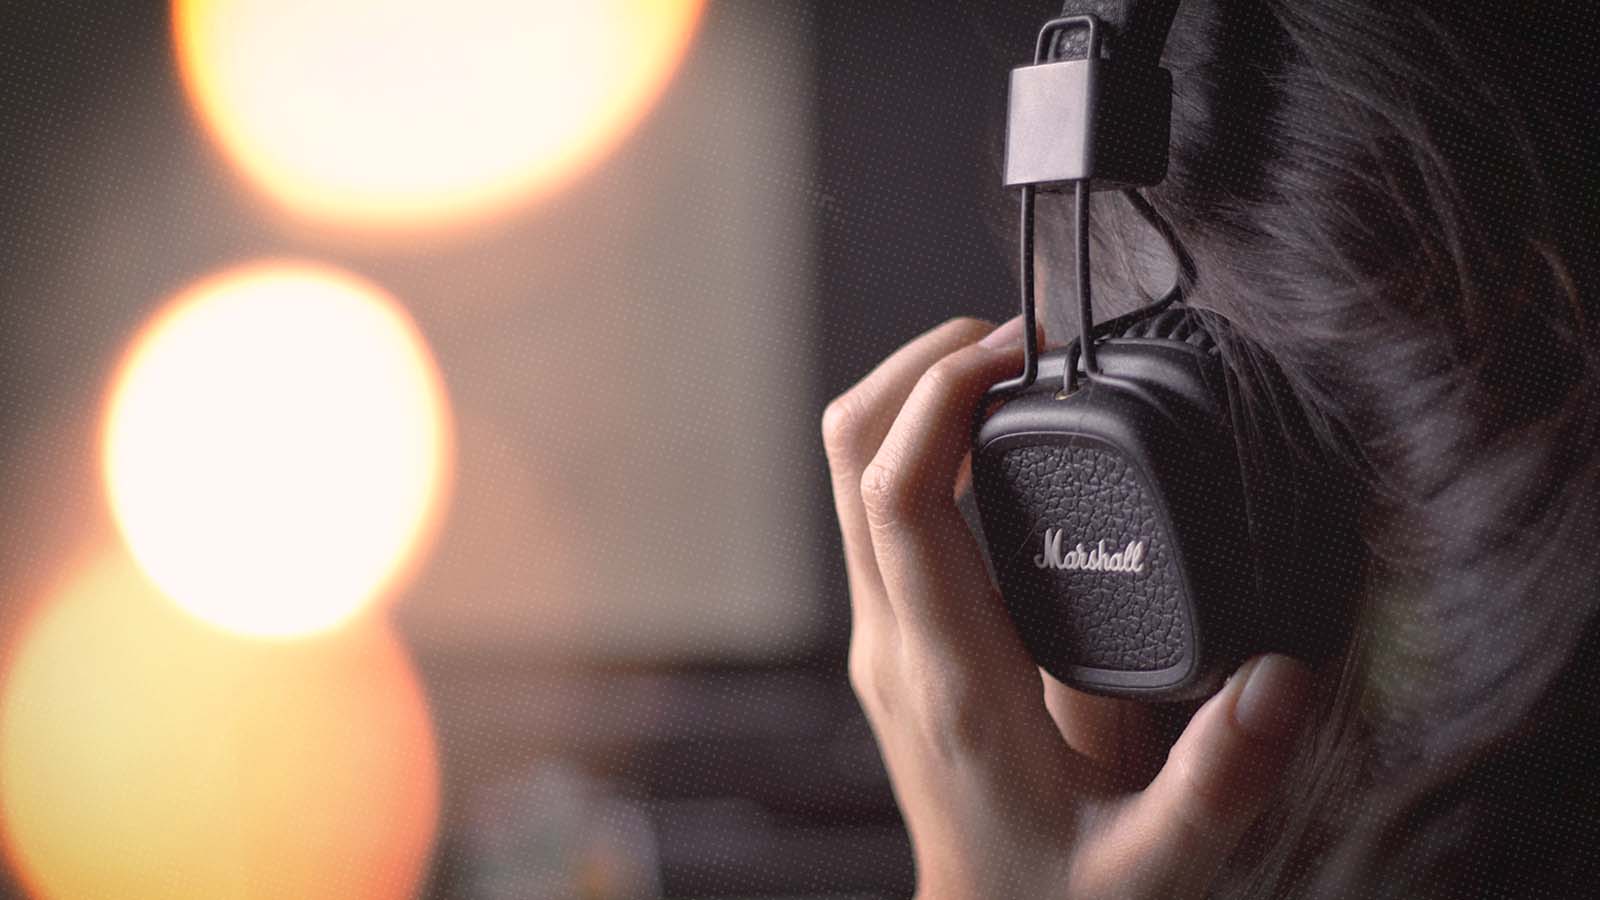 close up photo of a person wearing headphones with their hand on them